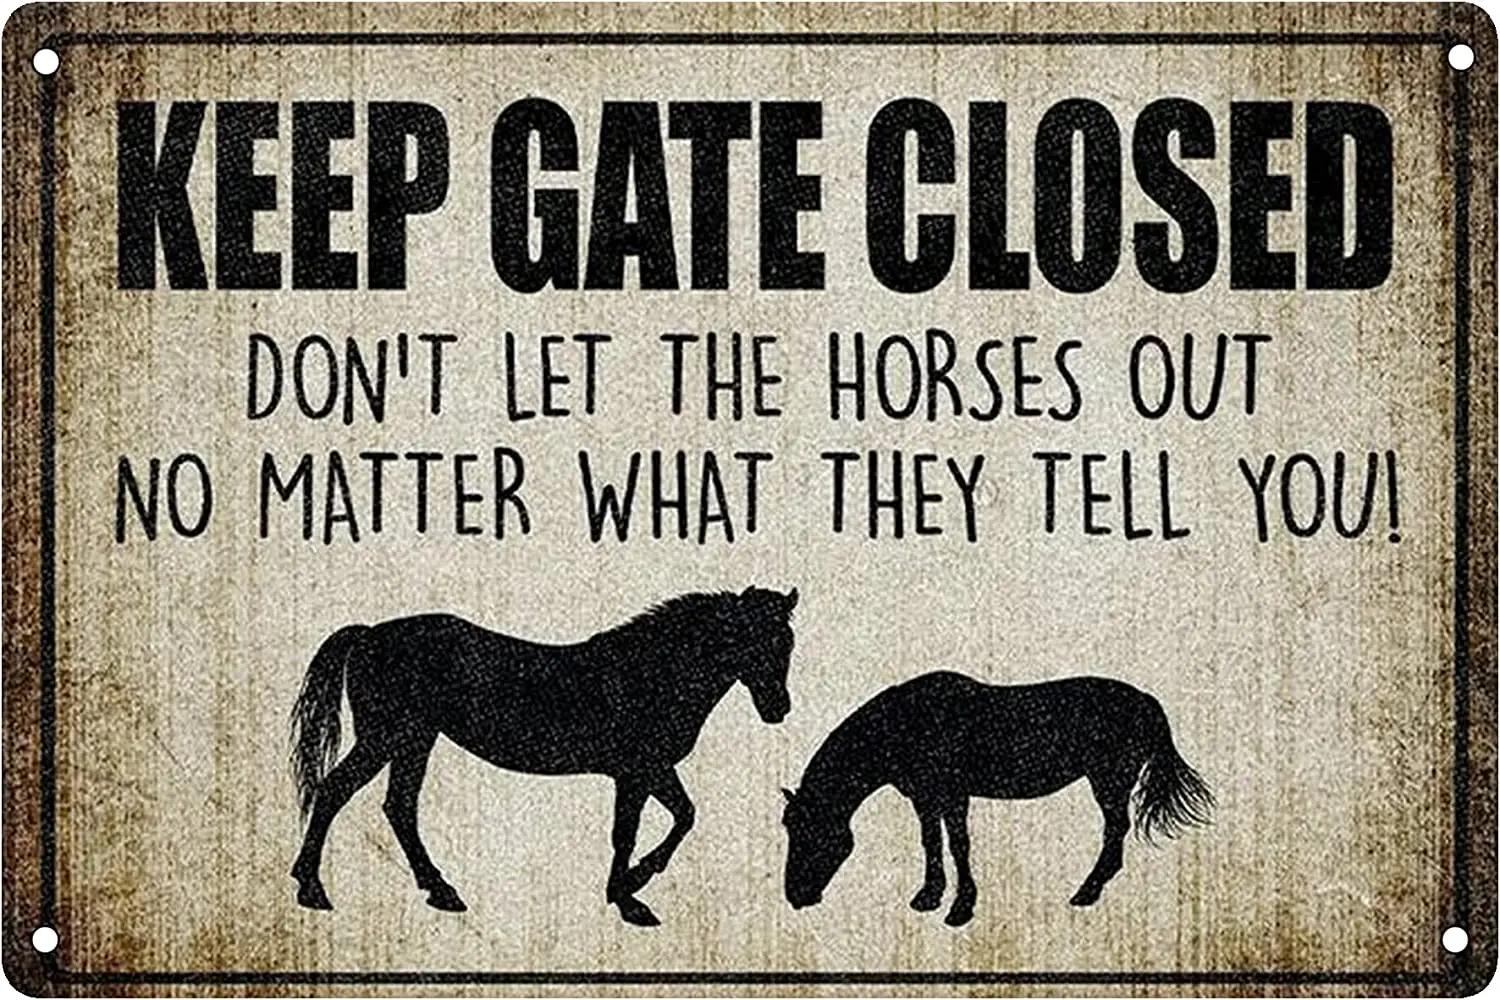 

Keep Gate Closed Don't Let The Horses Out No Matter What They Tell You Retro Vintage Metal Tin Signs Wall Decoration